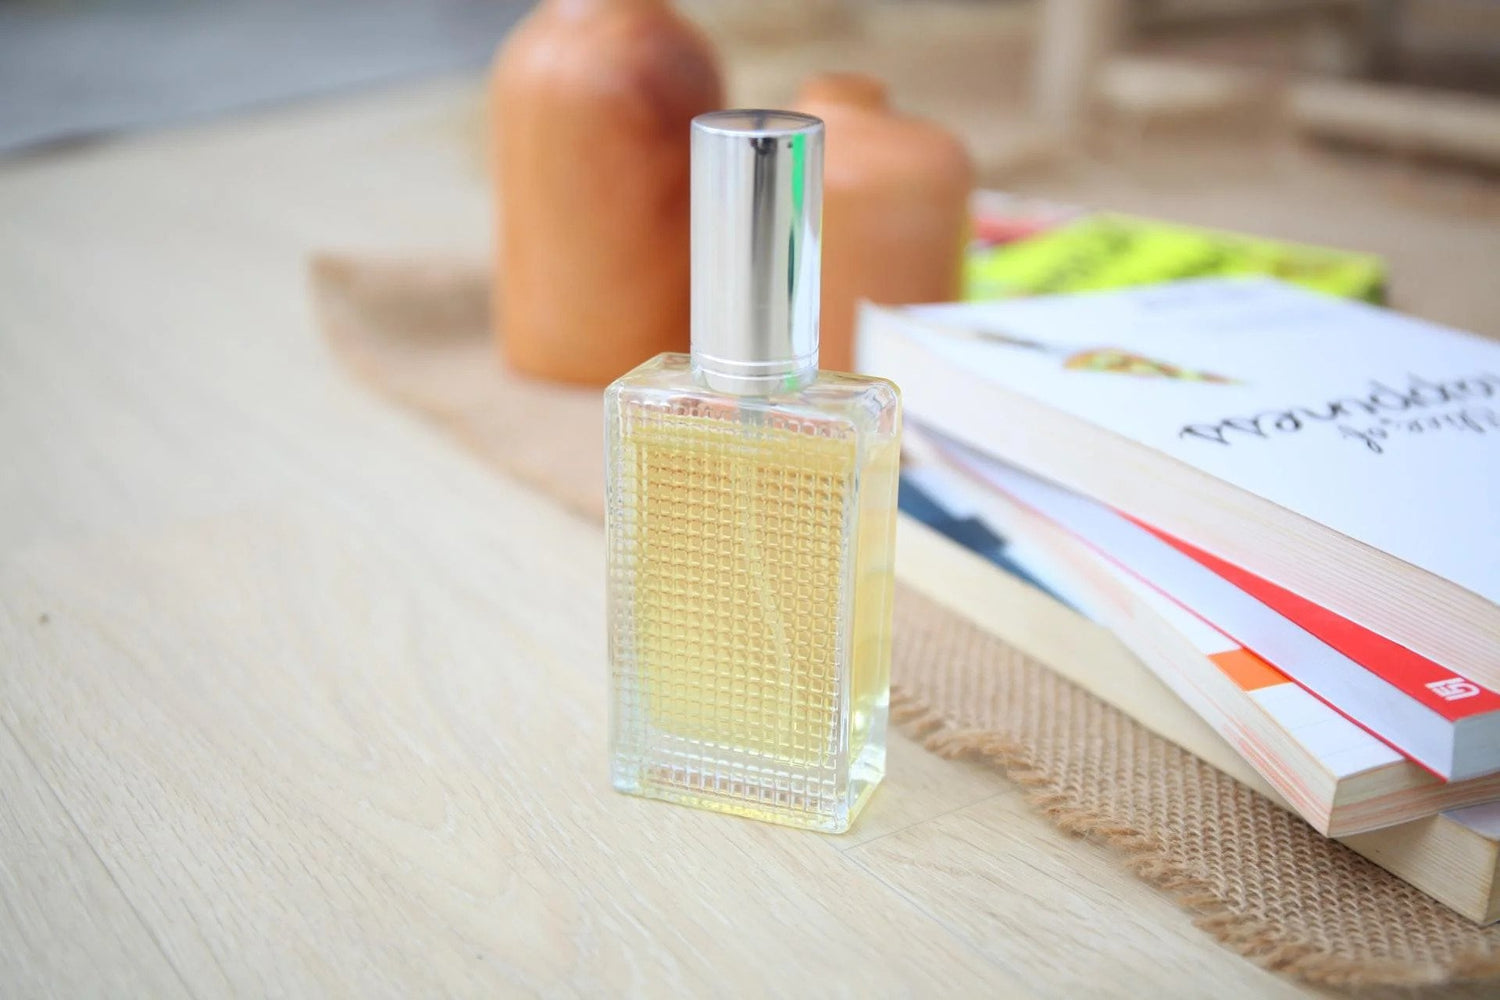 SHOULD YOU WEAR PERFUME OR AFTERSHAVE EVERY DAY?